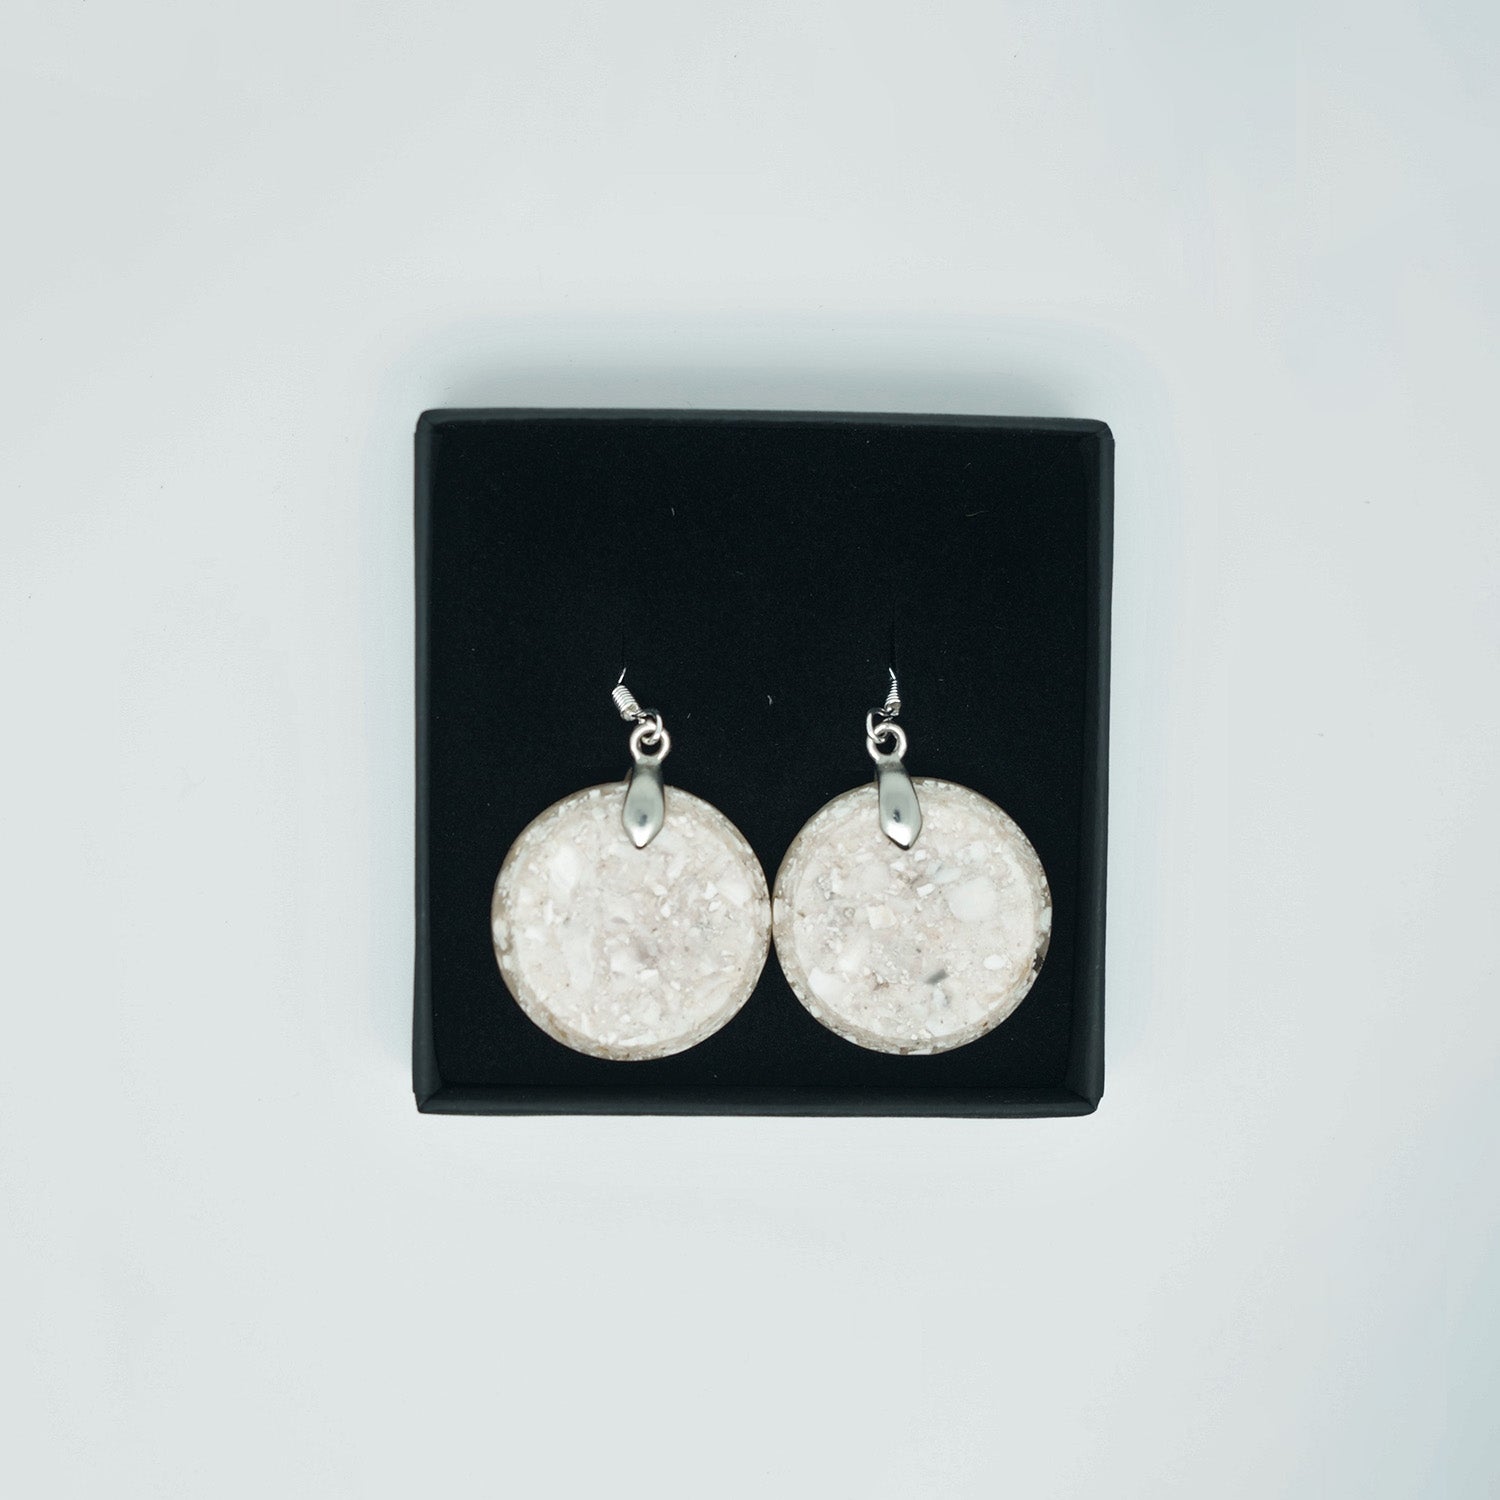 Round earrings made from recycled oyster shells